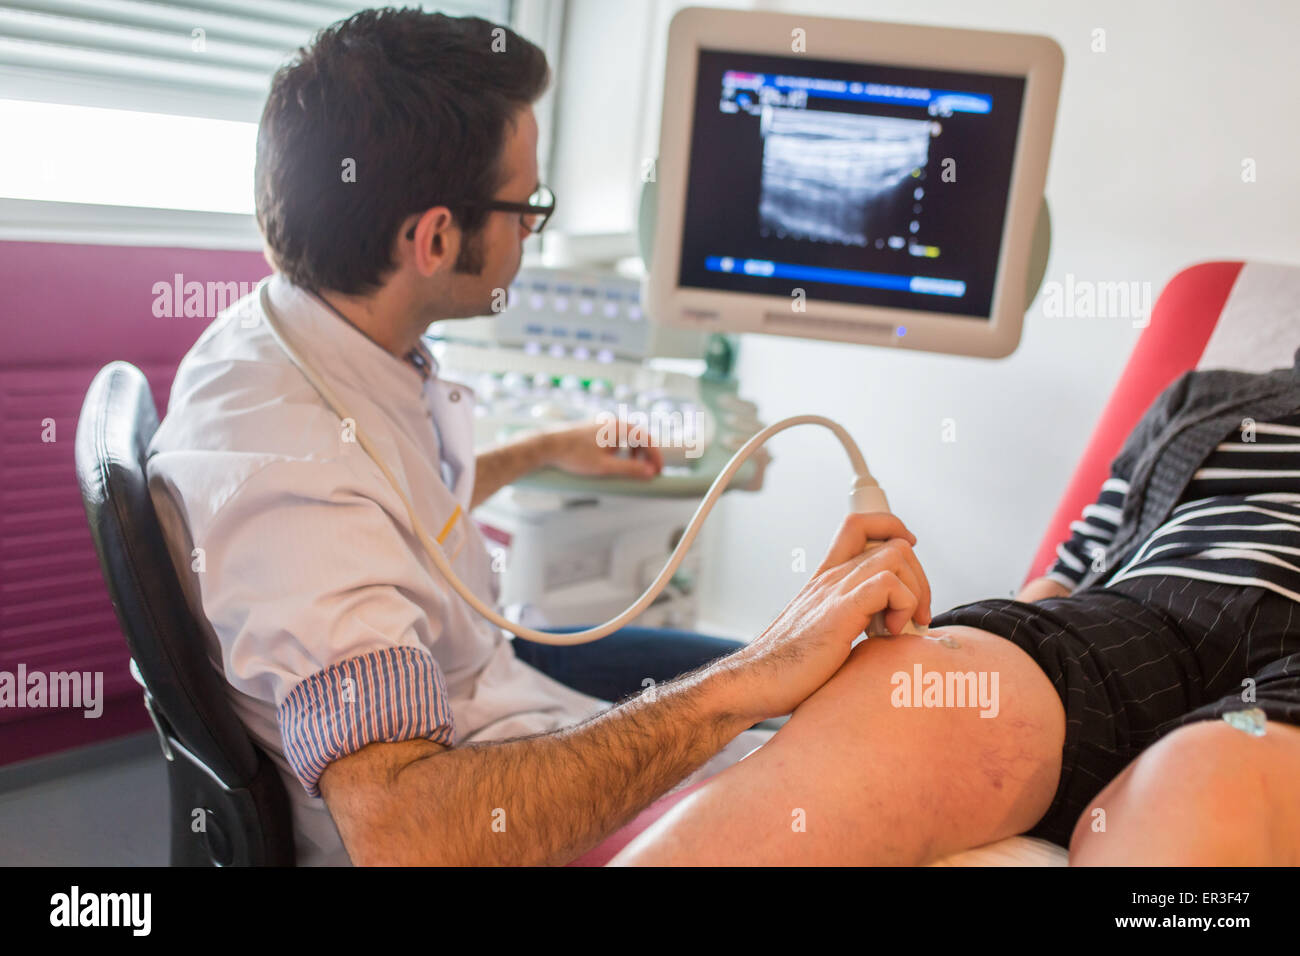 Ultrasound of the knee of a patient with rheumatoid arthritis conducted by a rheumatologist, Bordeaux hospital, France. Stock Photo